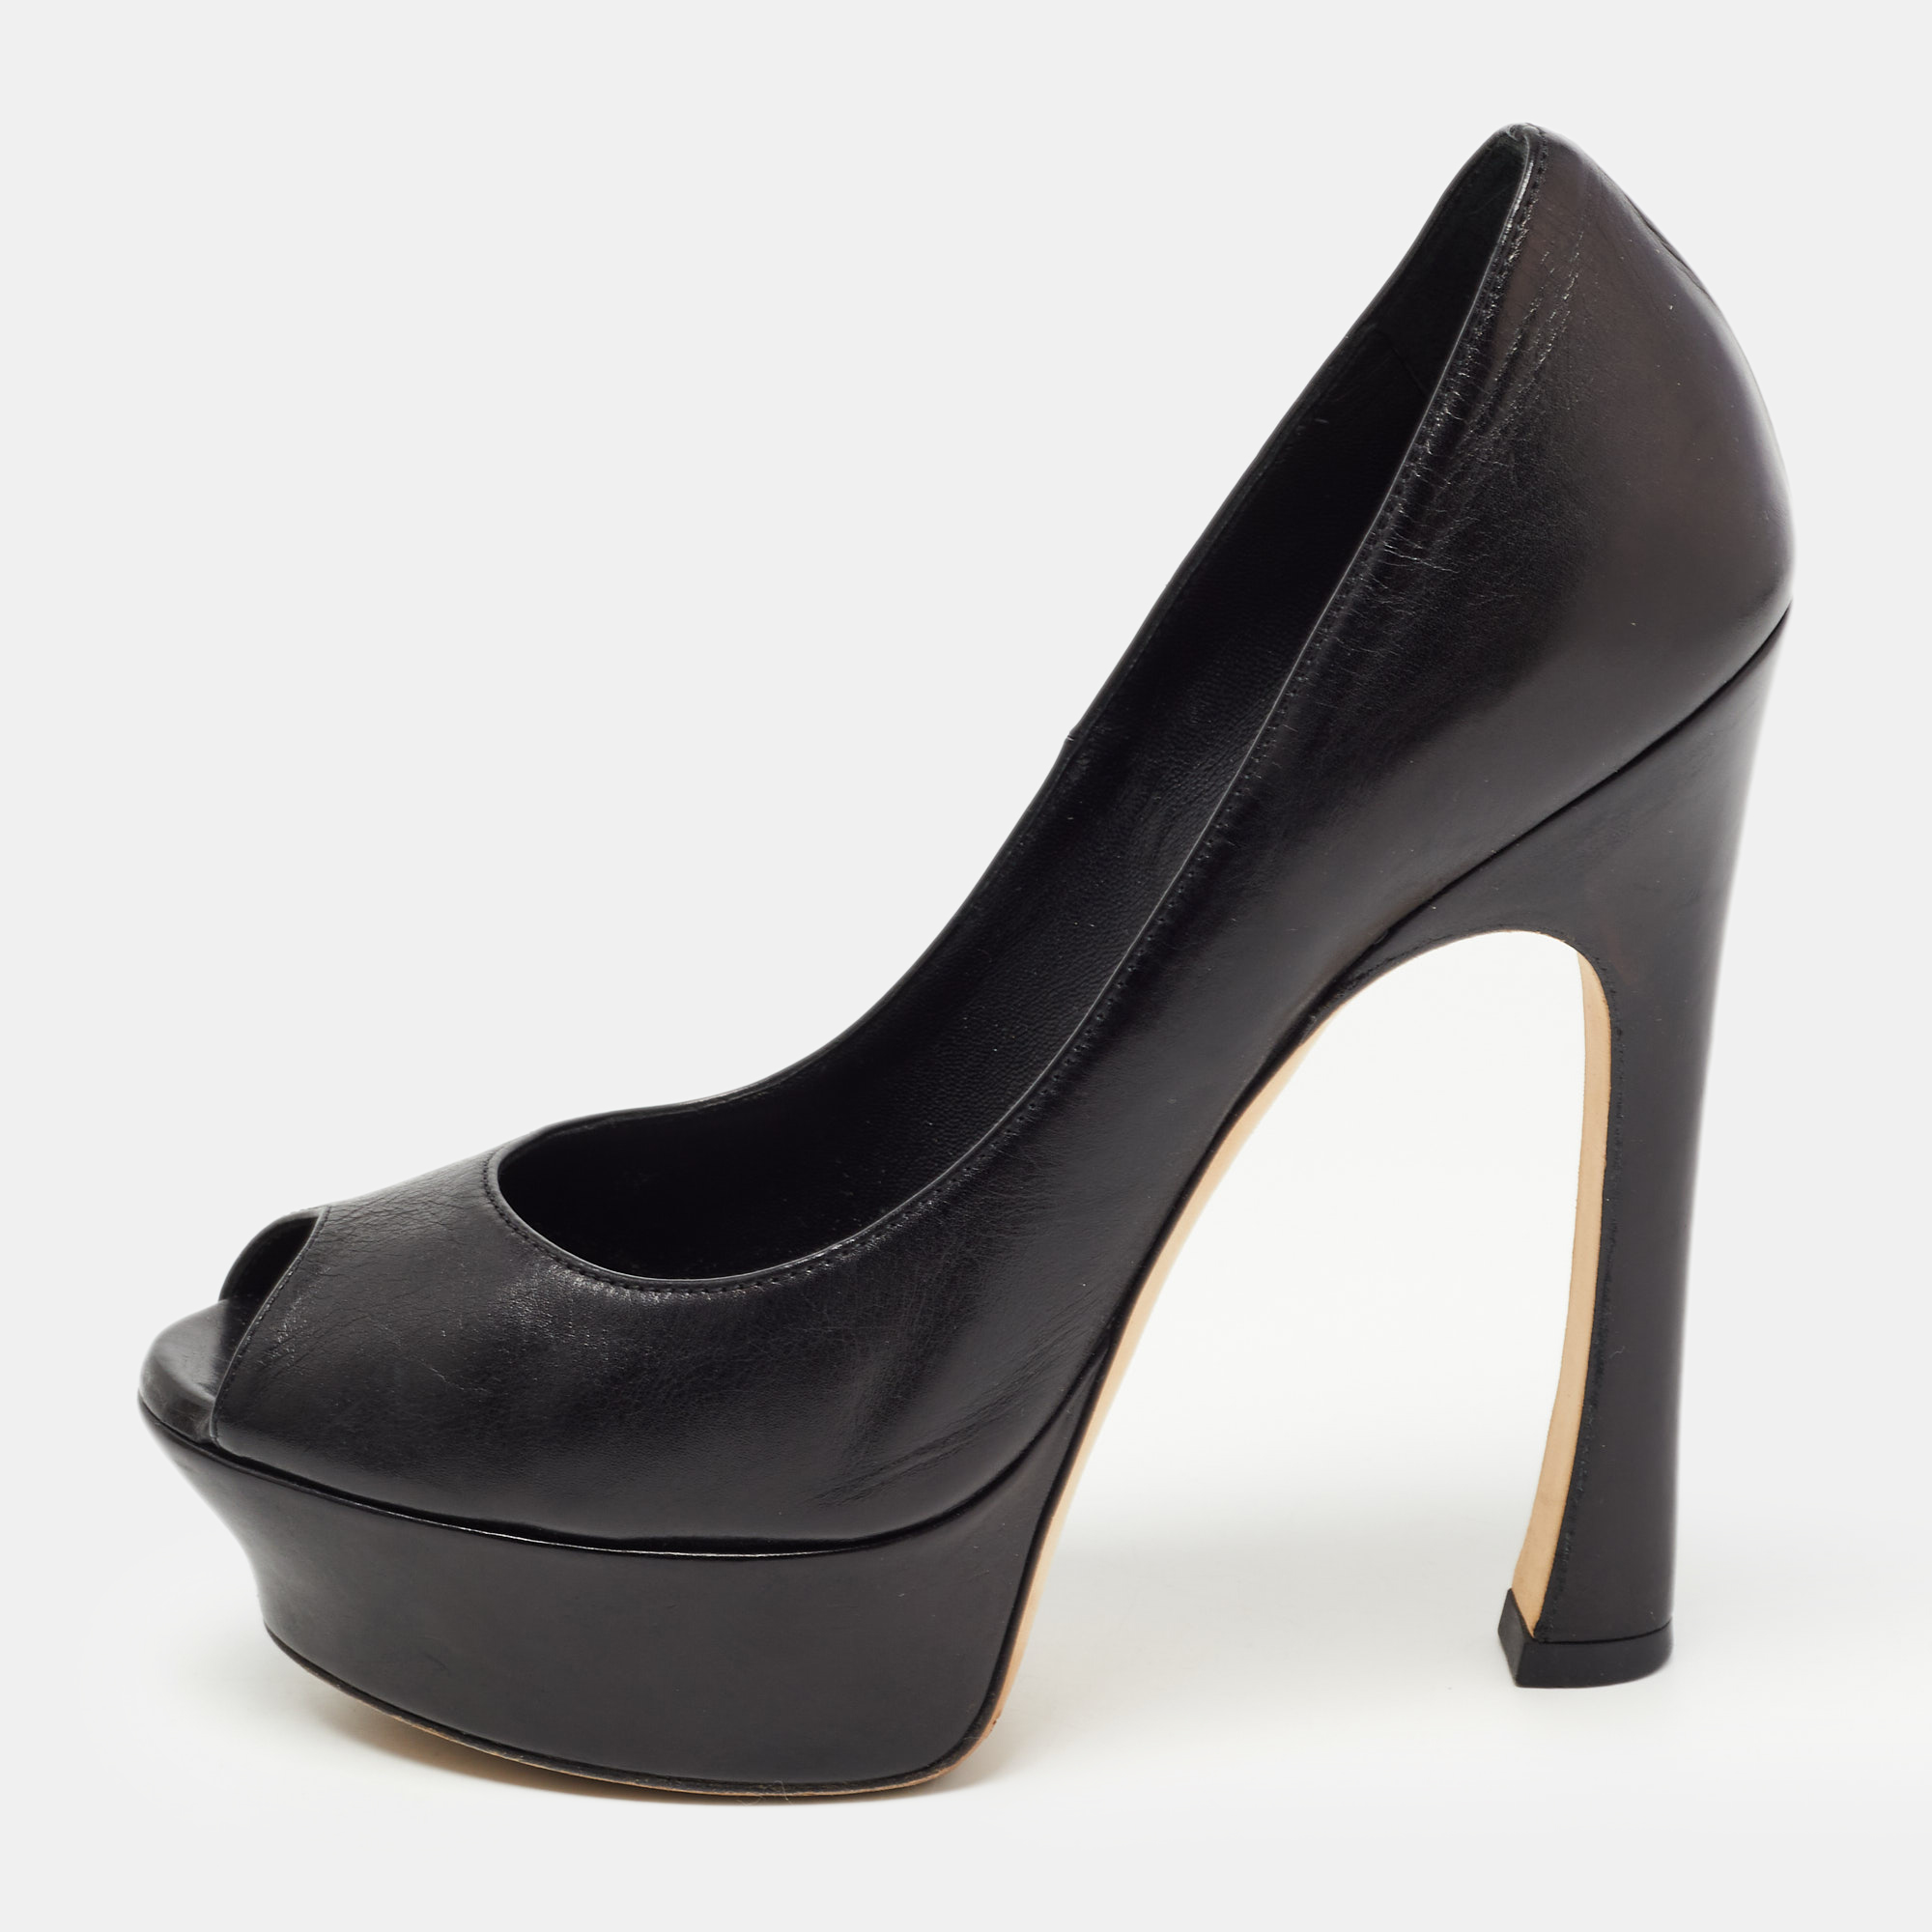 Exhibit an elegant style with this pair of YSL pumps. These elegant shoes are crafted from quality materials. They are set on durable soles and sleek heels.